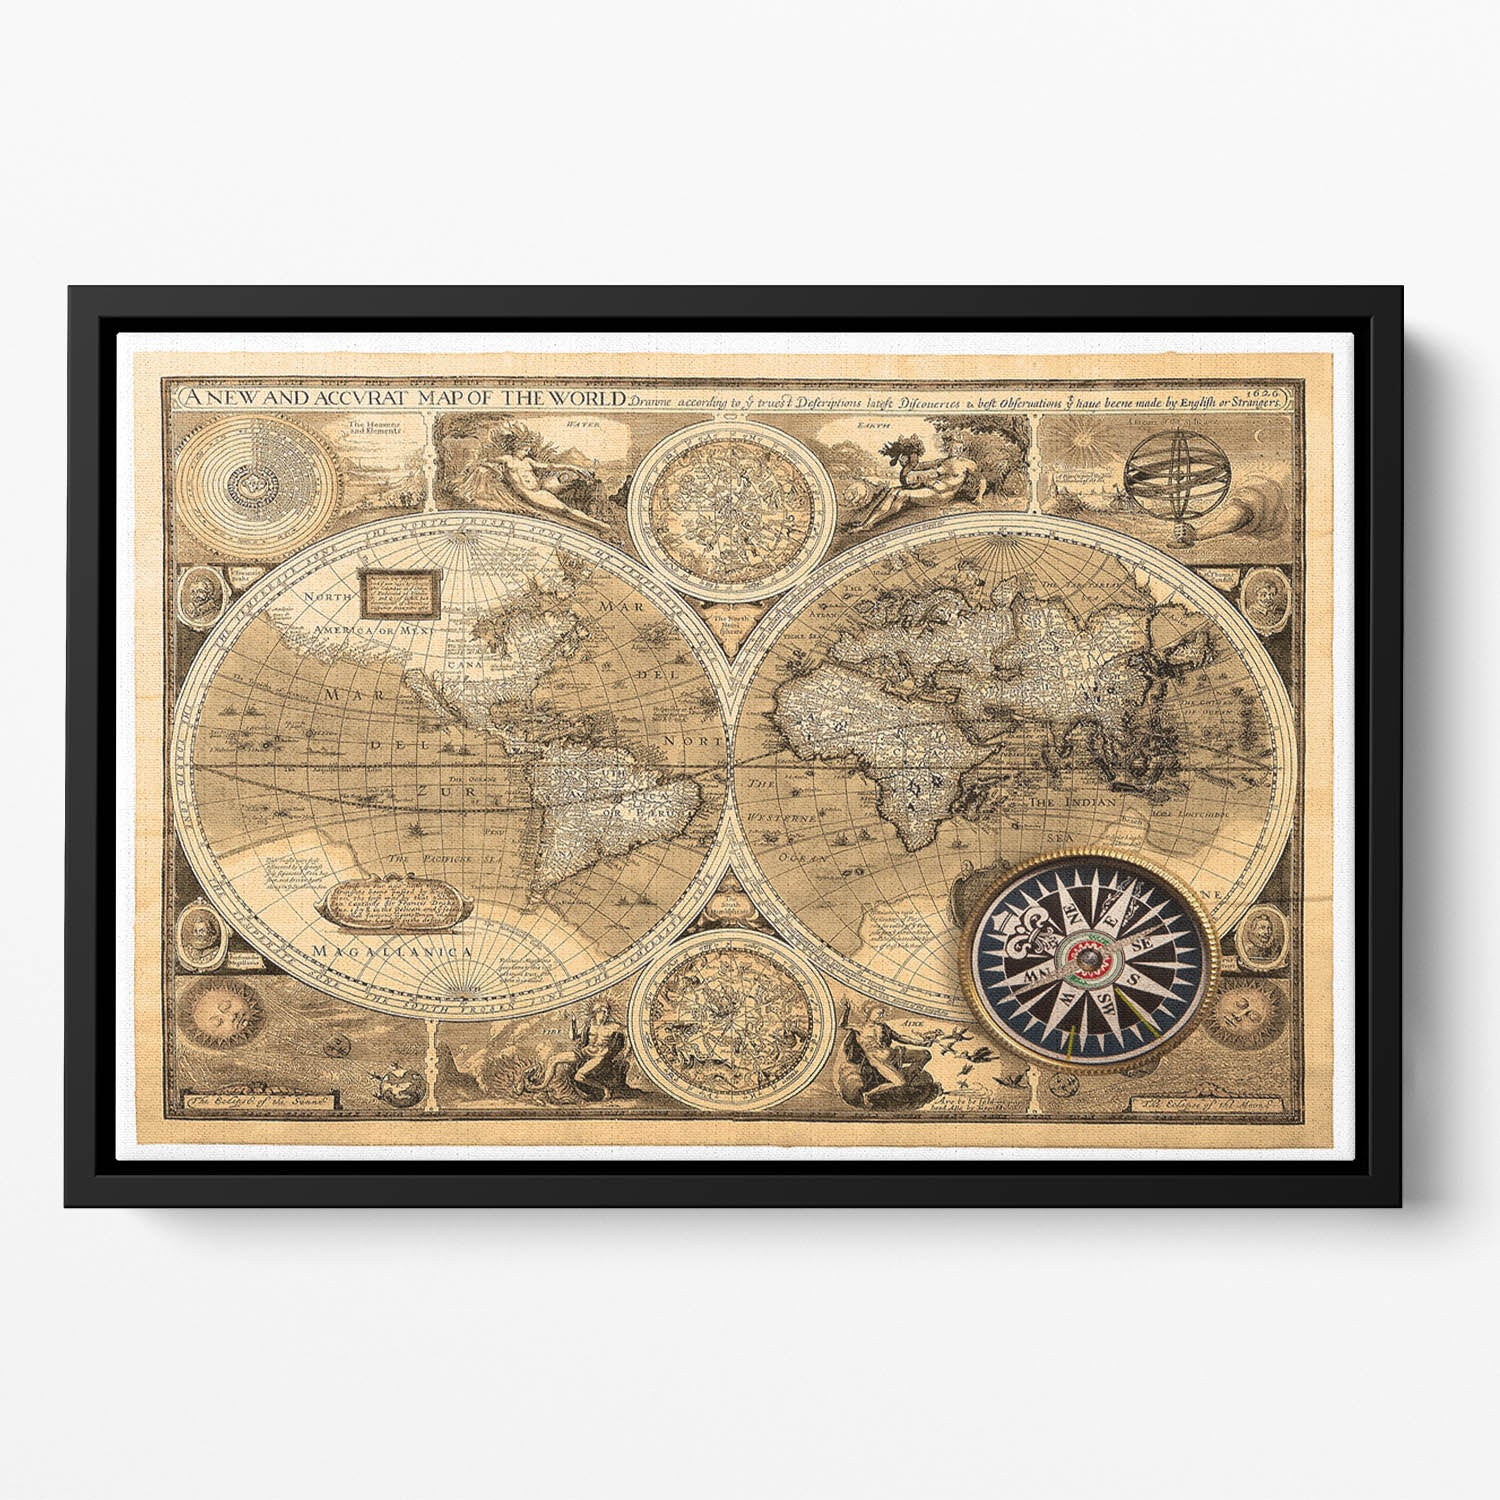 A new and accvrat map of the world Floating Framed Canvas